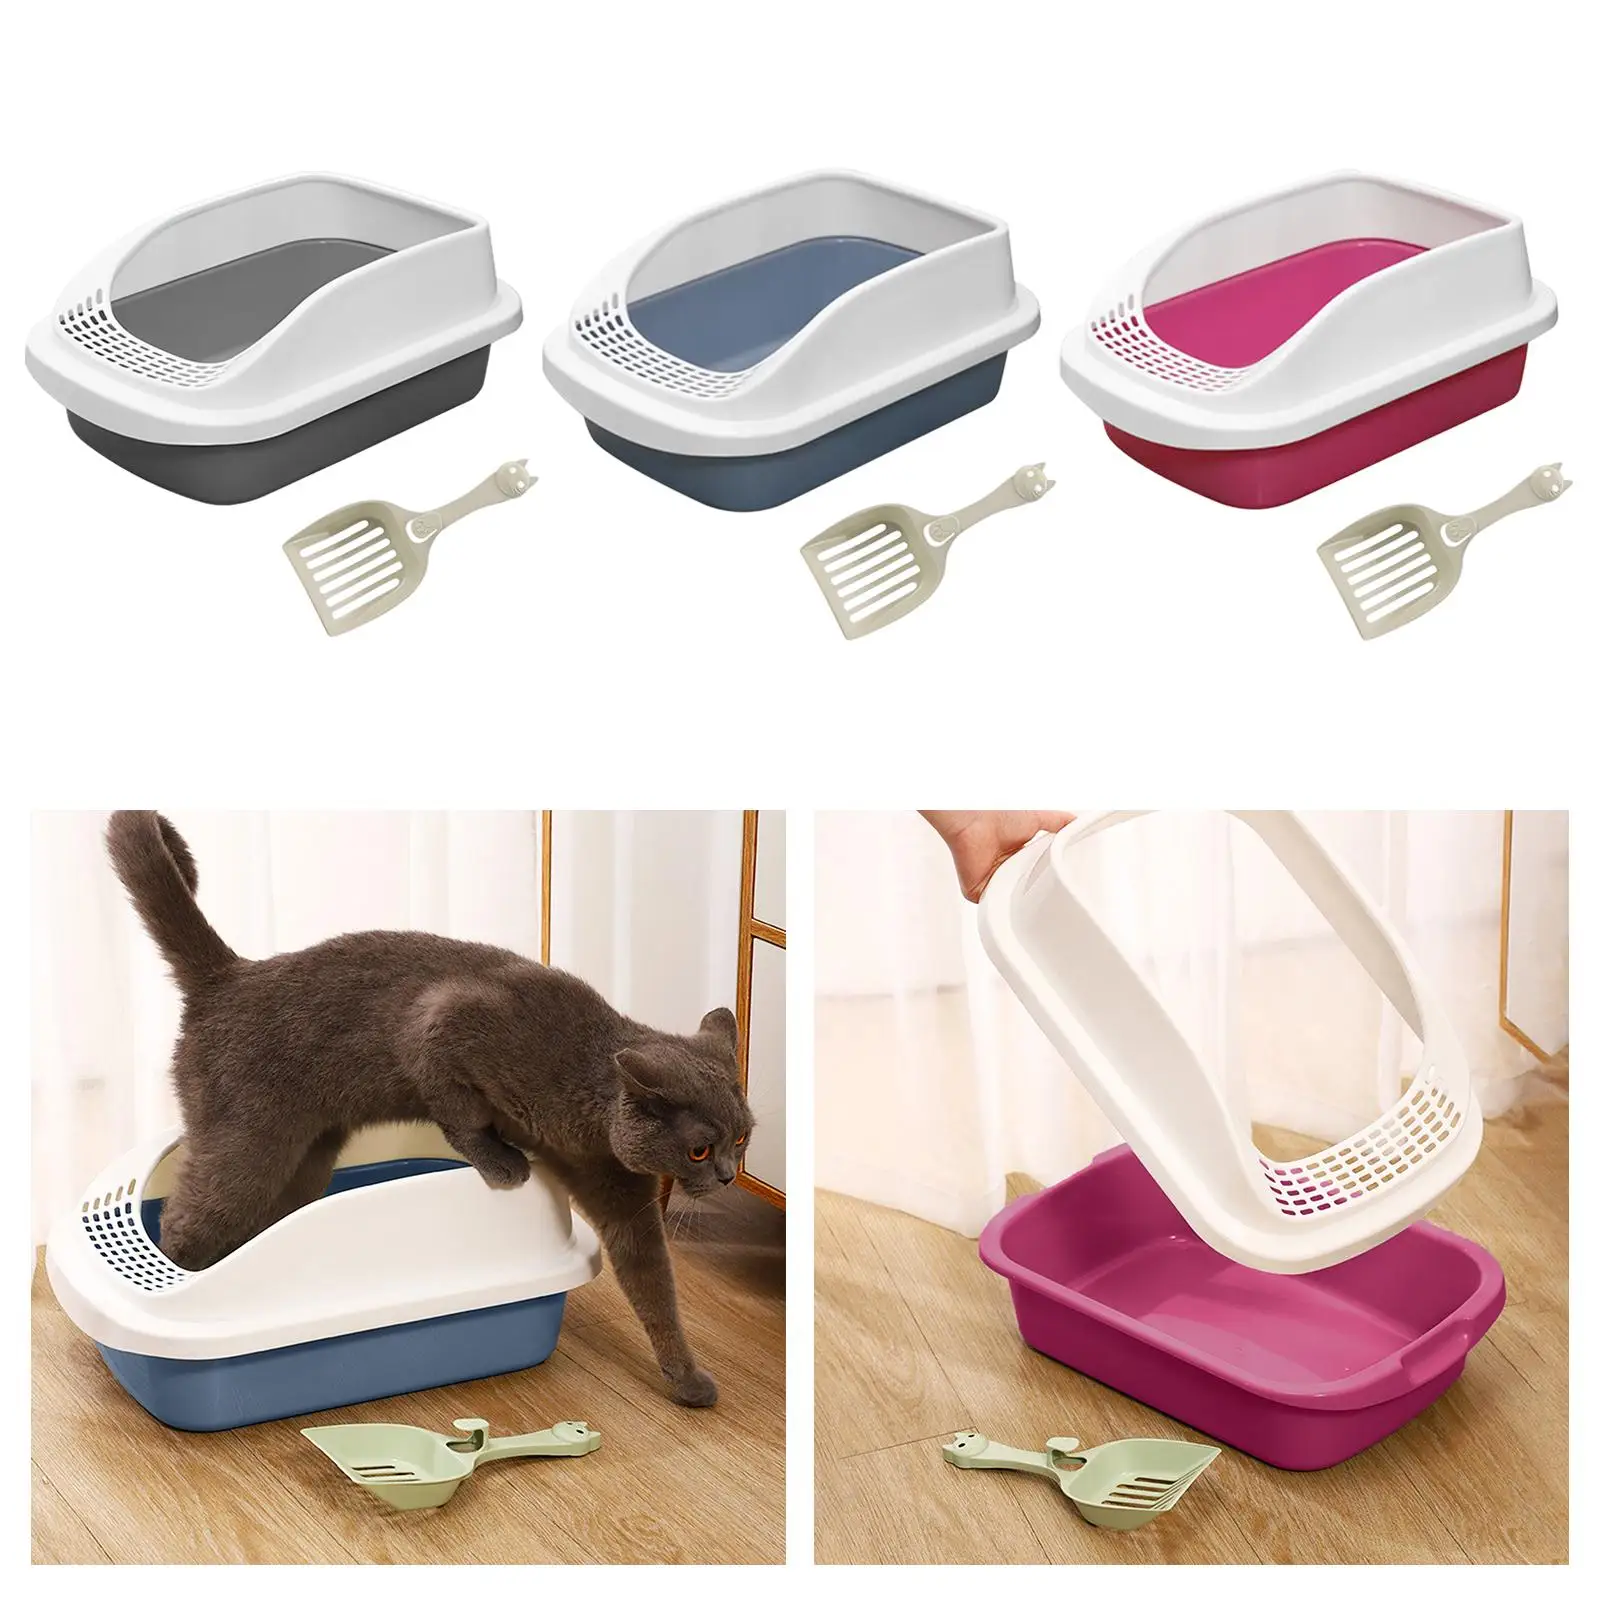 Litter Pan Toilette Sand Box Container Cage Cat Litter Box Pets Litter Trays for Rabbit Small Animals Kitten Hamsters Kitty